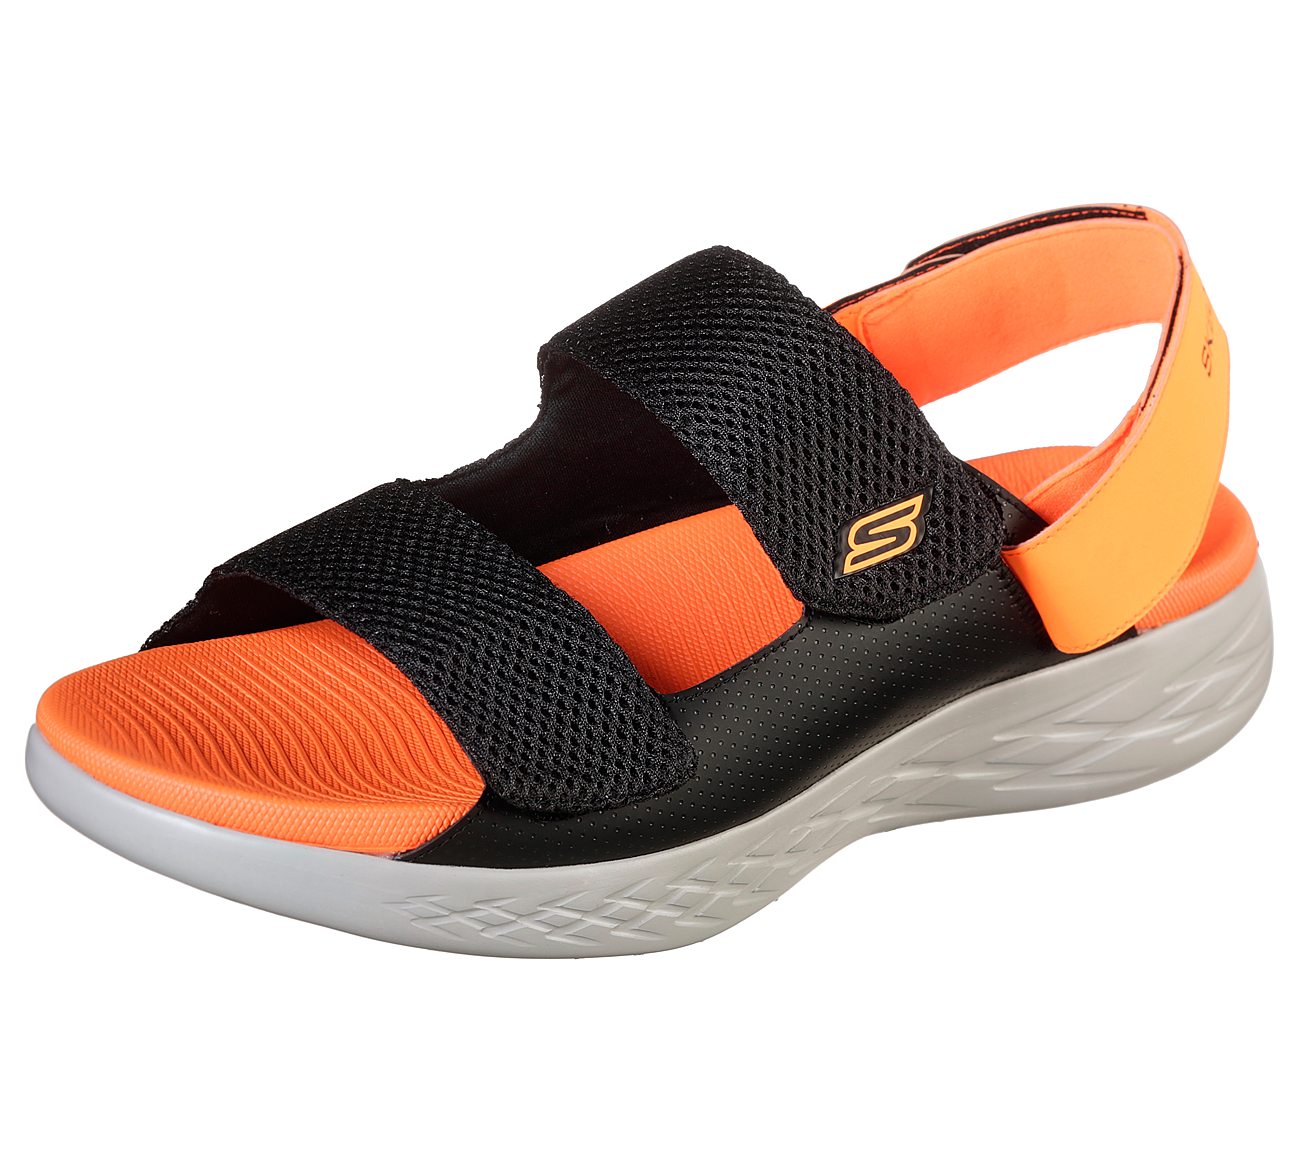 ON-THE-GO 600 - VIRTUOUS, BLACK/ORANGE Footwear Lateral View